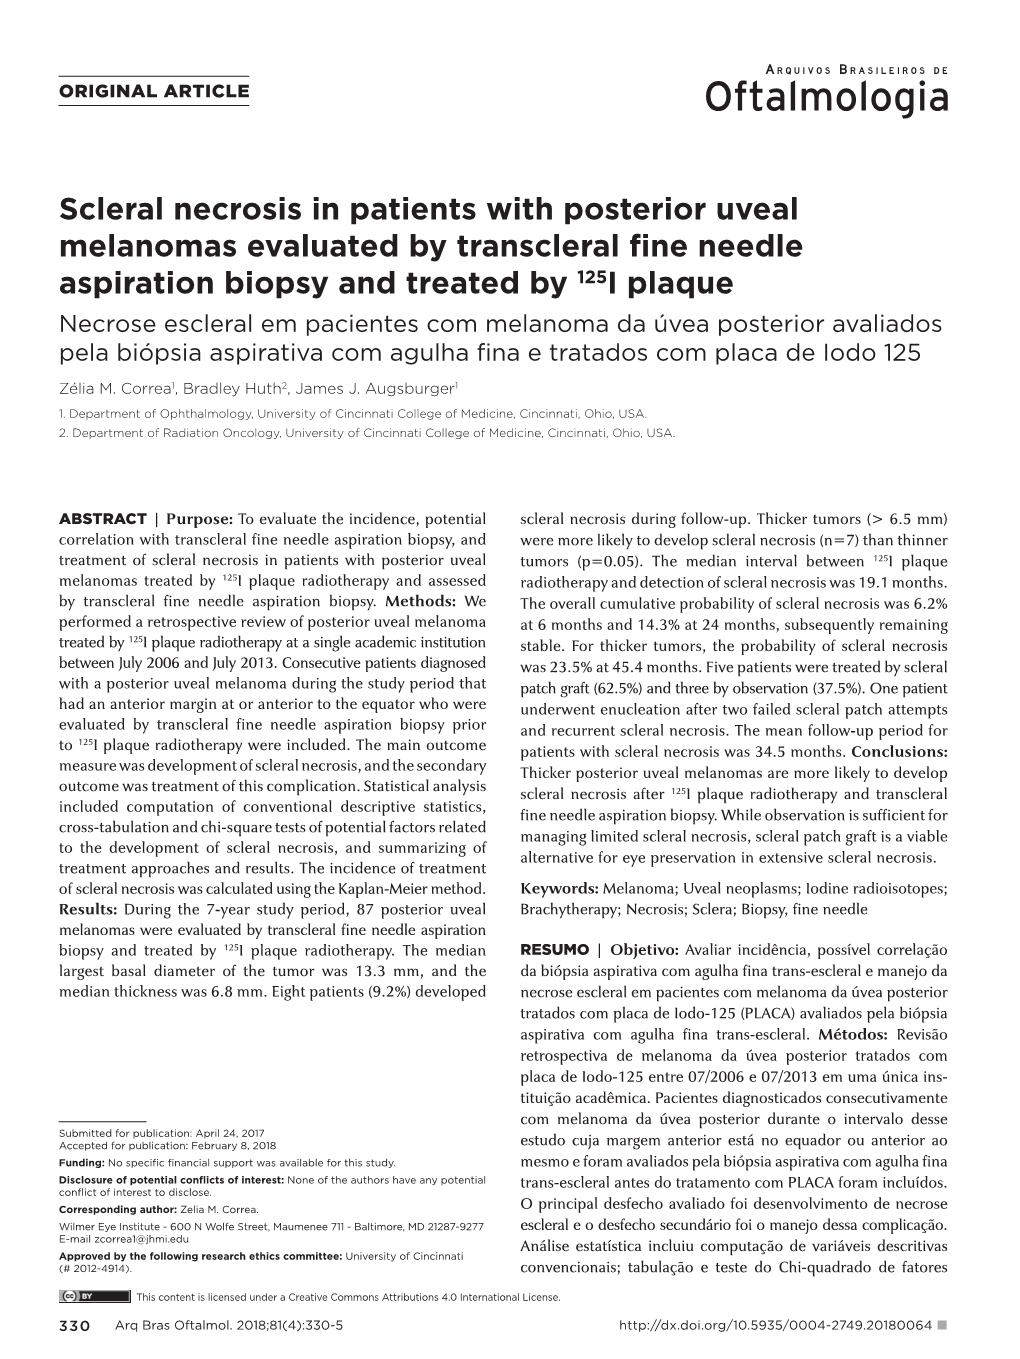 Scleral Necrosis in Patients with Posterior Uveal Melanomas